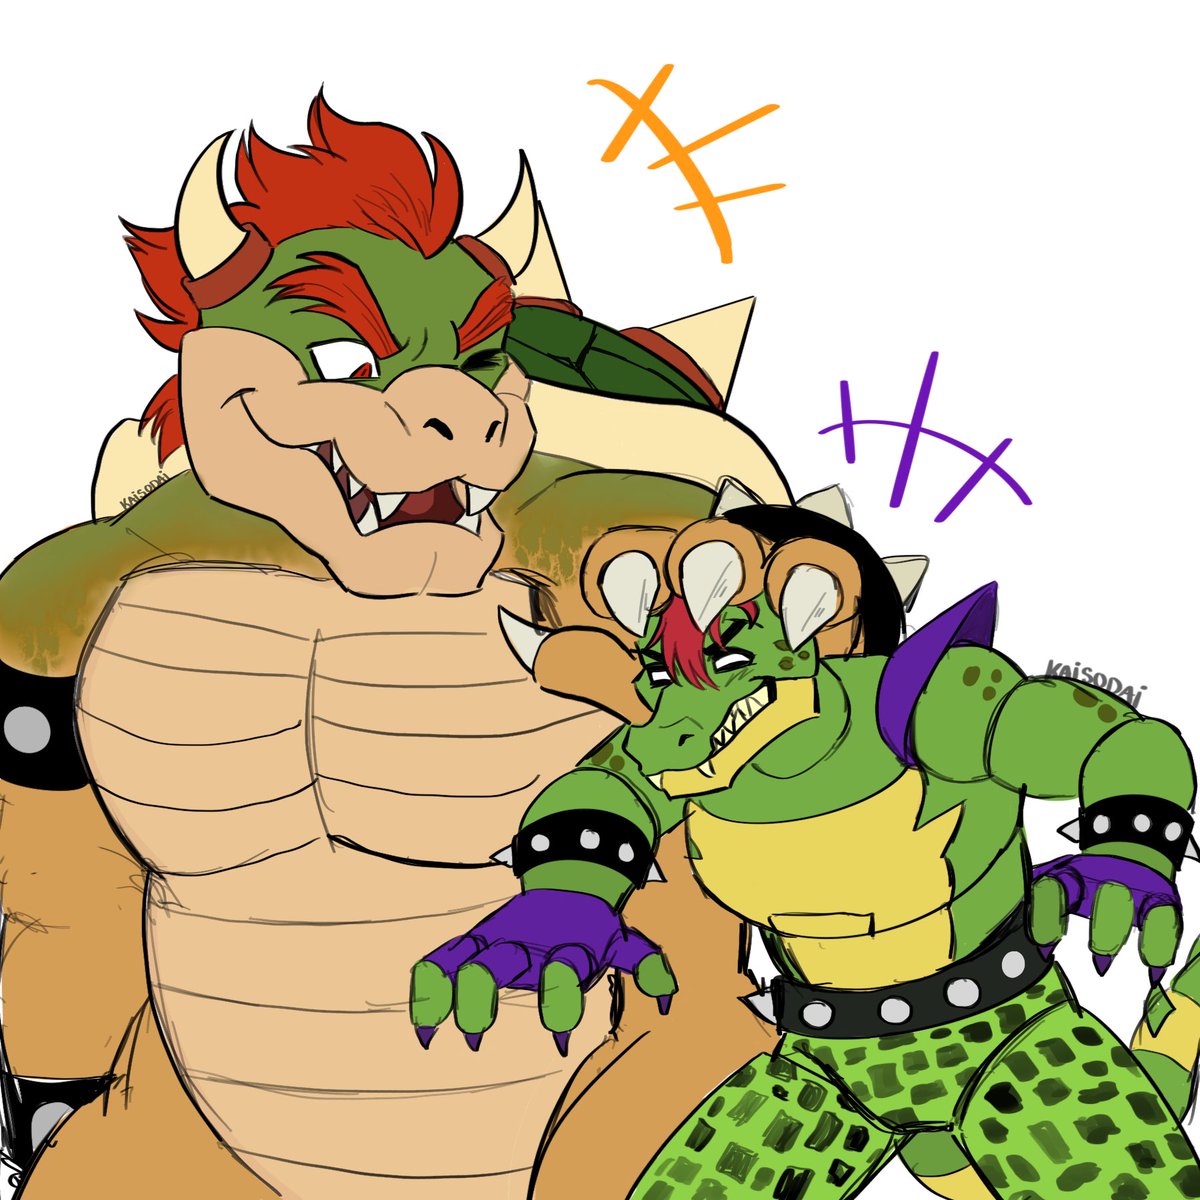 I think they’d get along 

#montgomerygator #montyfnaf #bowser #thesupermariomovie #SuperMarioBrosMovie #securitybreach #fnaf #fnafsecuritybreach